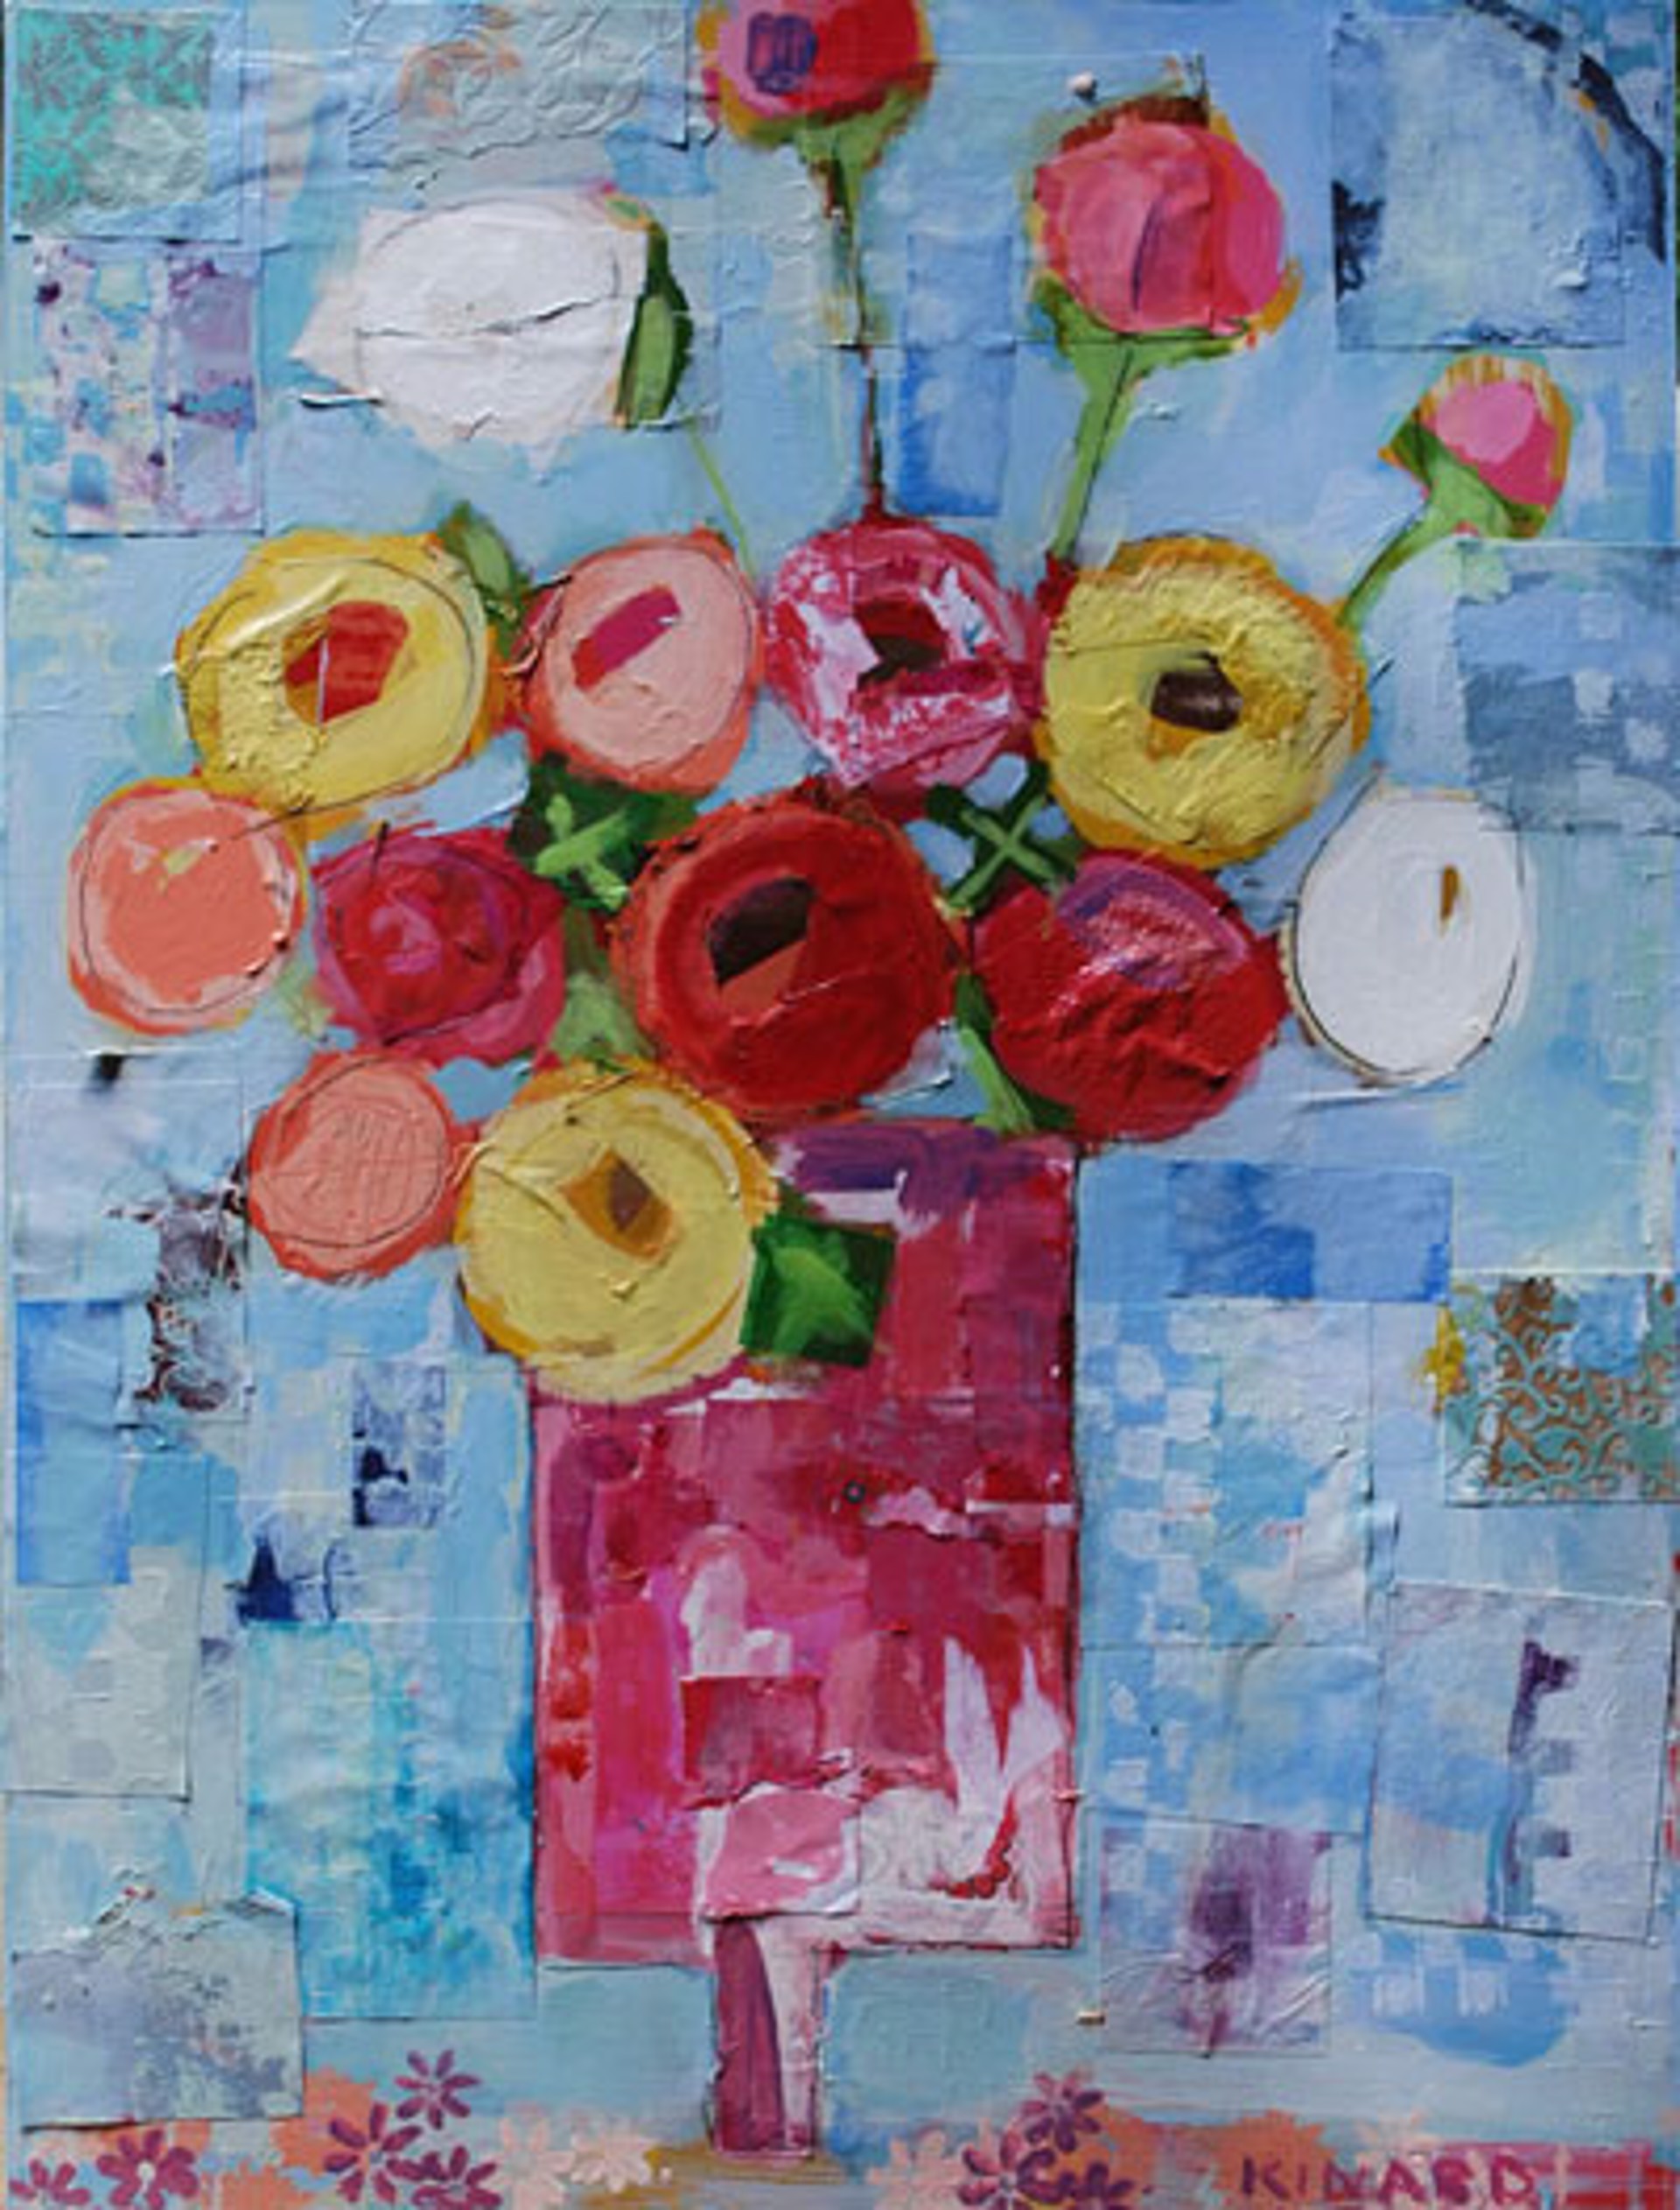 Mixed Bouquet by Christy Kinard